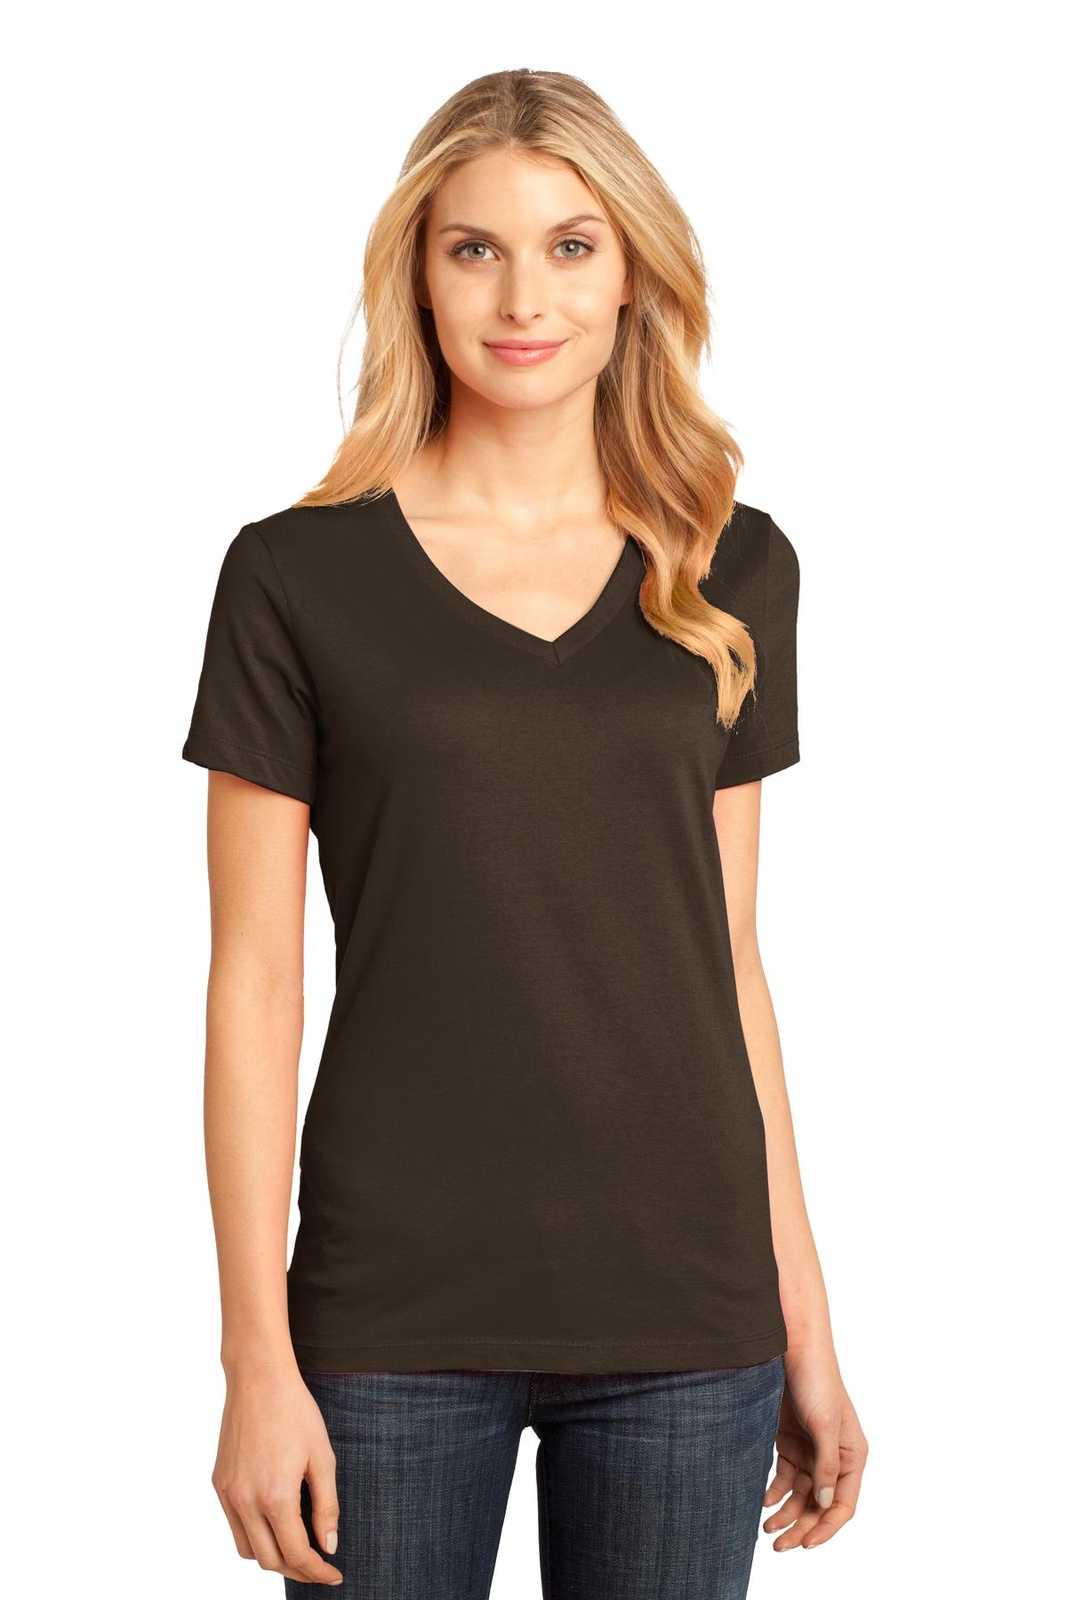 District DM1170L Women's Perfect Weight V-Neck Tee - Espresso - HIT a Double - 1